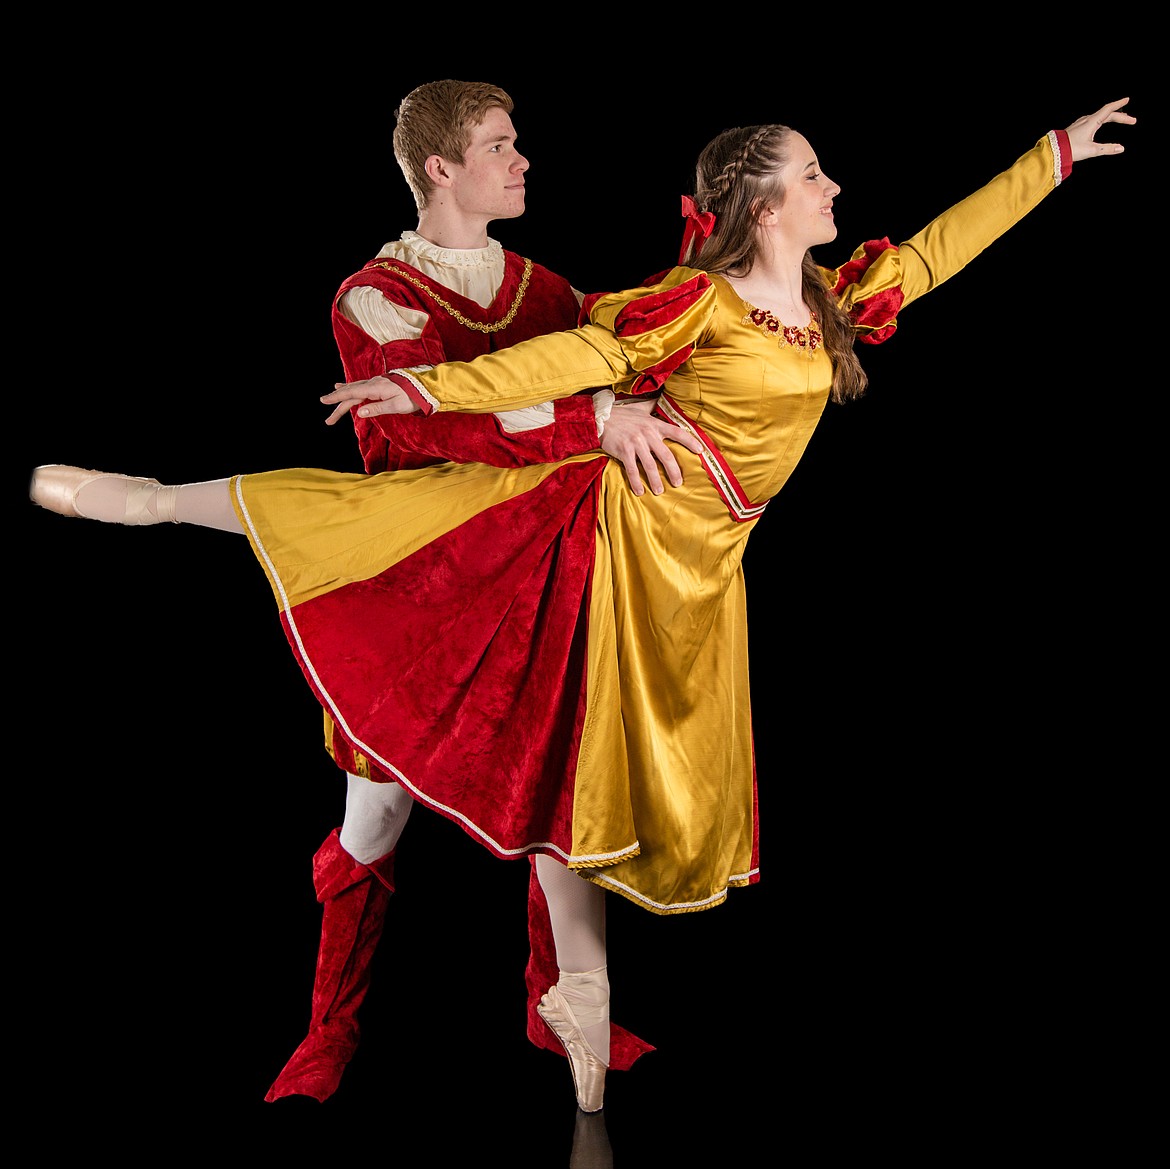 Northwest Ballet Company principal dancer Joelle Folkman as Hermia and guest dancer Jarom Holcomb as Lysander in the spring production of Shakespeare's "A Midsummer Night's Dream" scheduled for May 13 and 14. (Photo by Picture Montana)